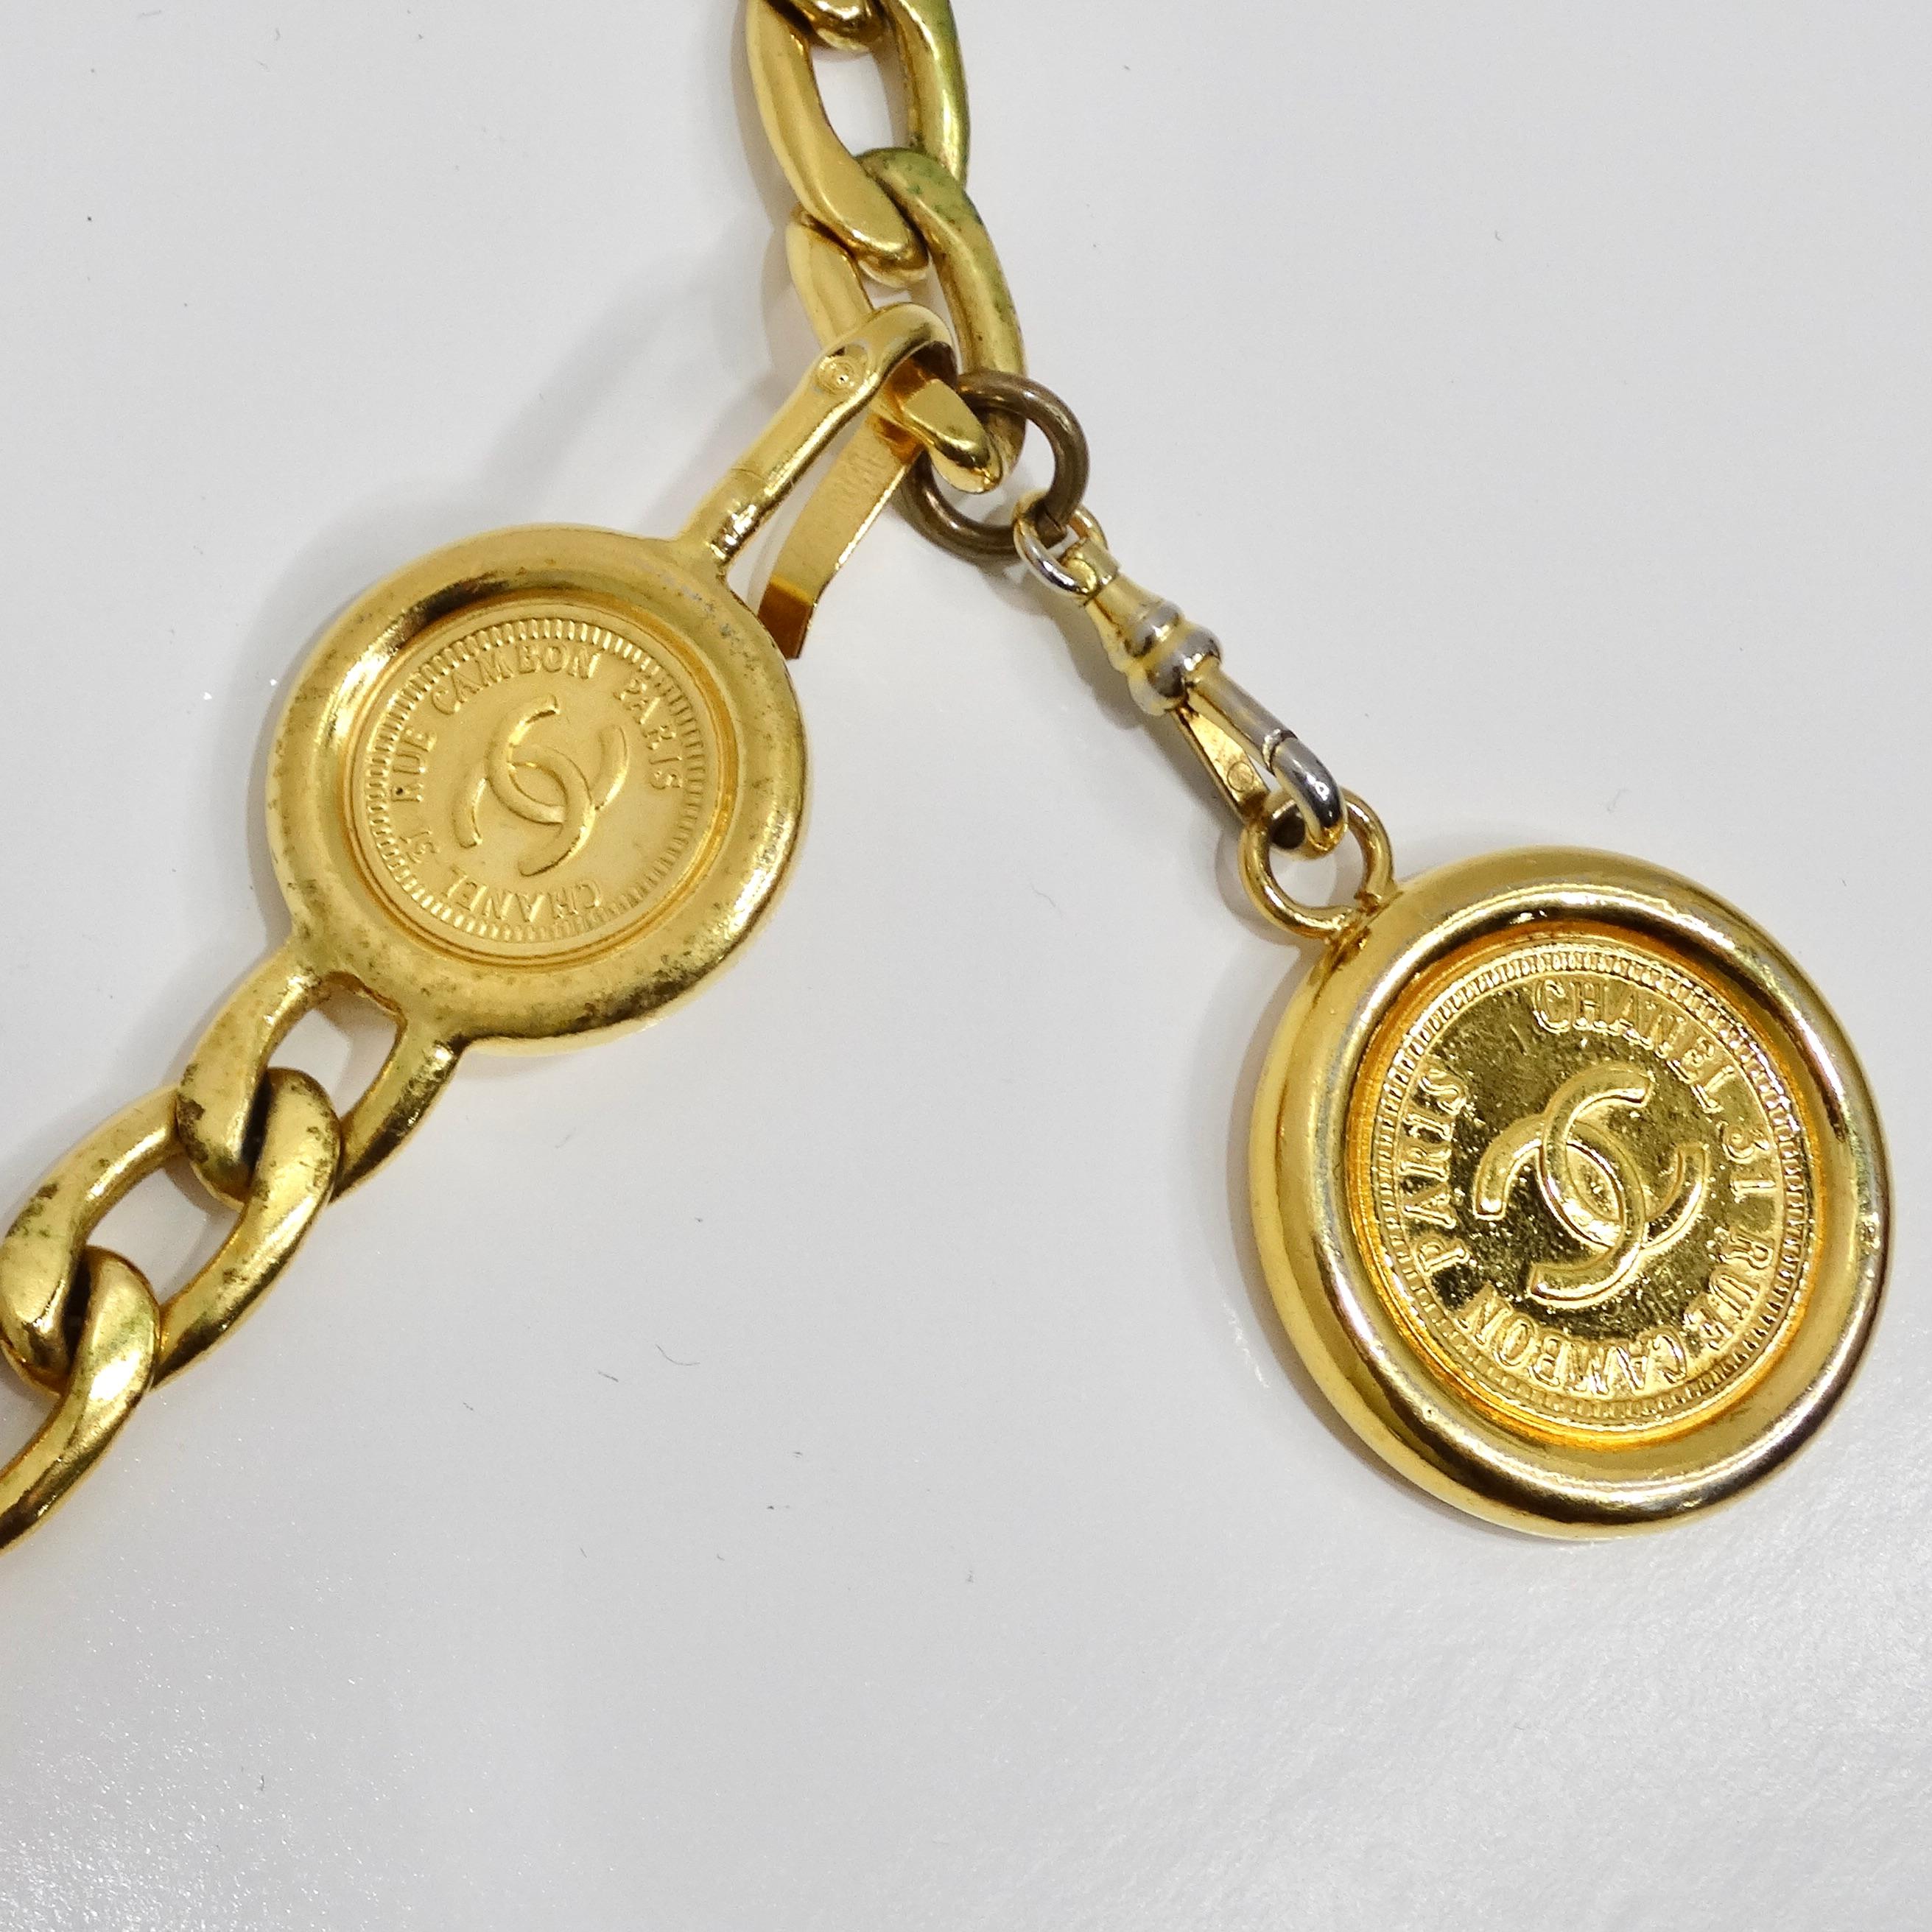 Chanel Spring 1994 Gold Tone CC Medallion Chain Belt In Good Condition For Sale In Scottsdale, AZ